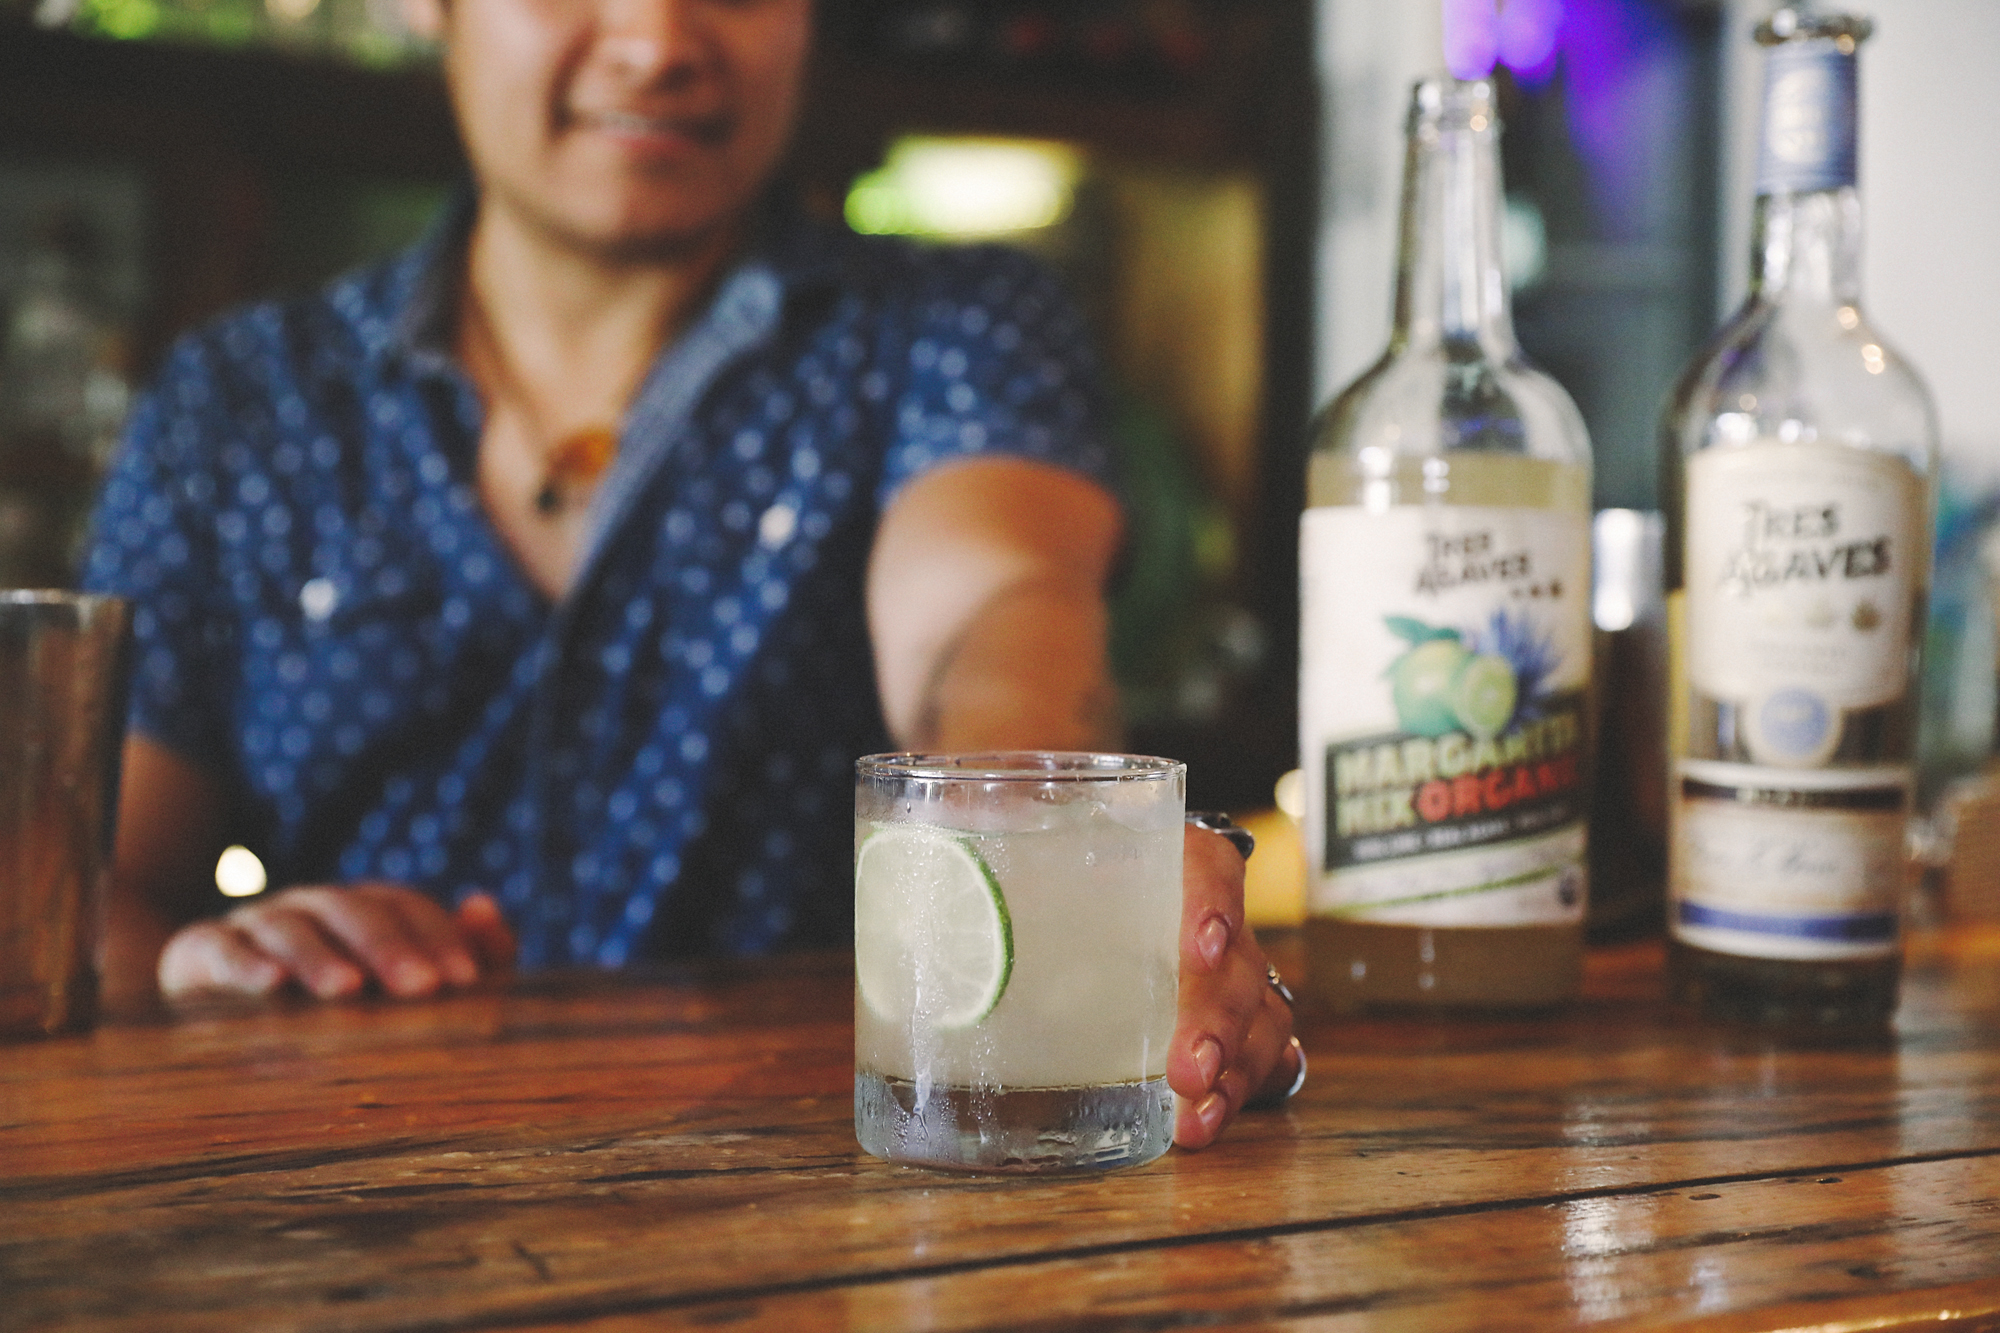 Organic margaritas are only a few ingredients away.